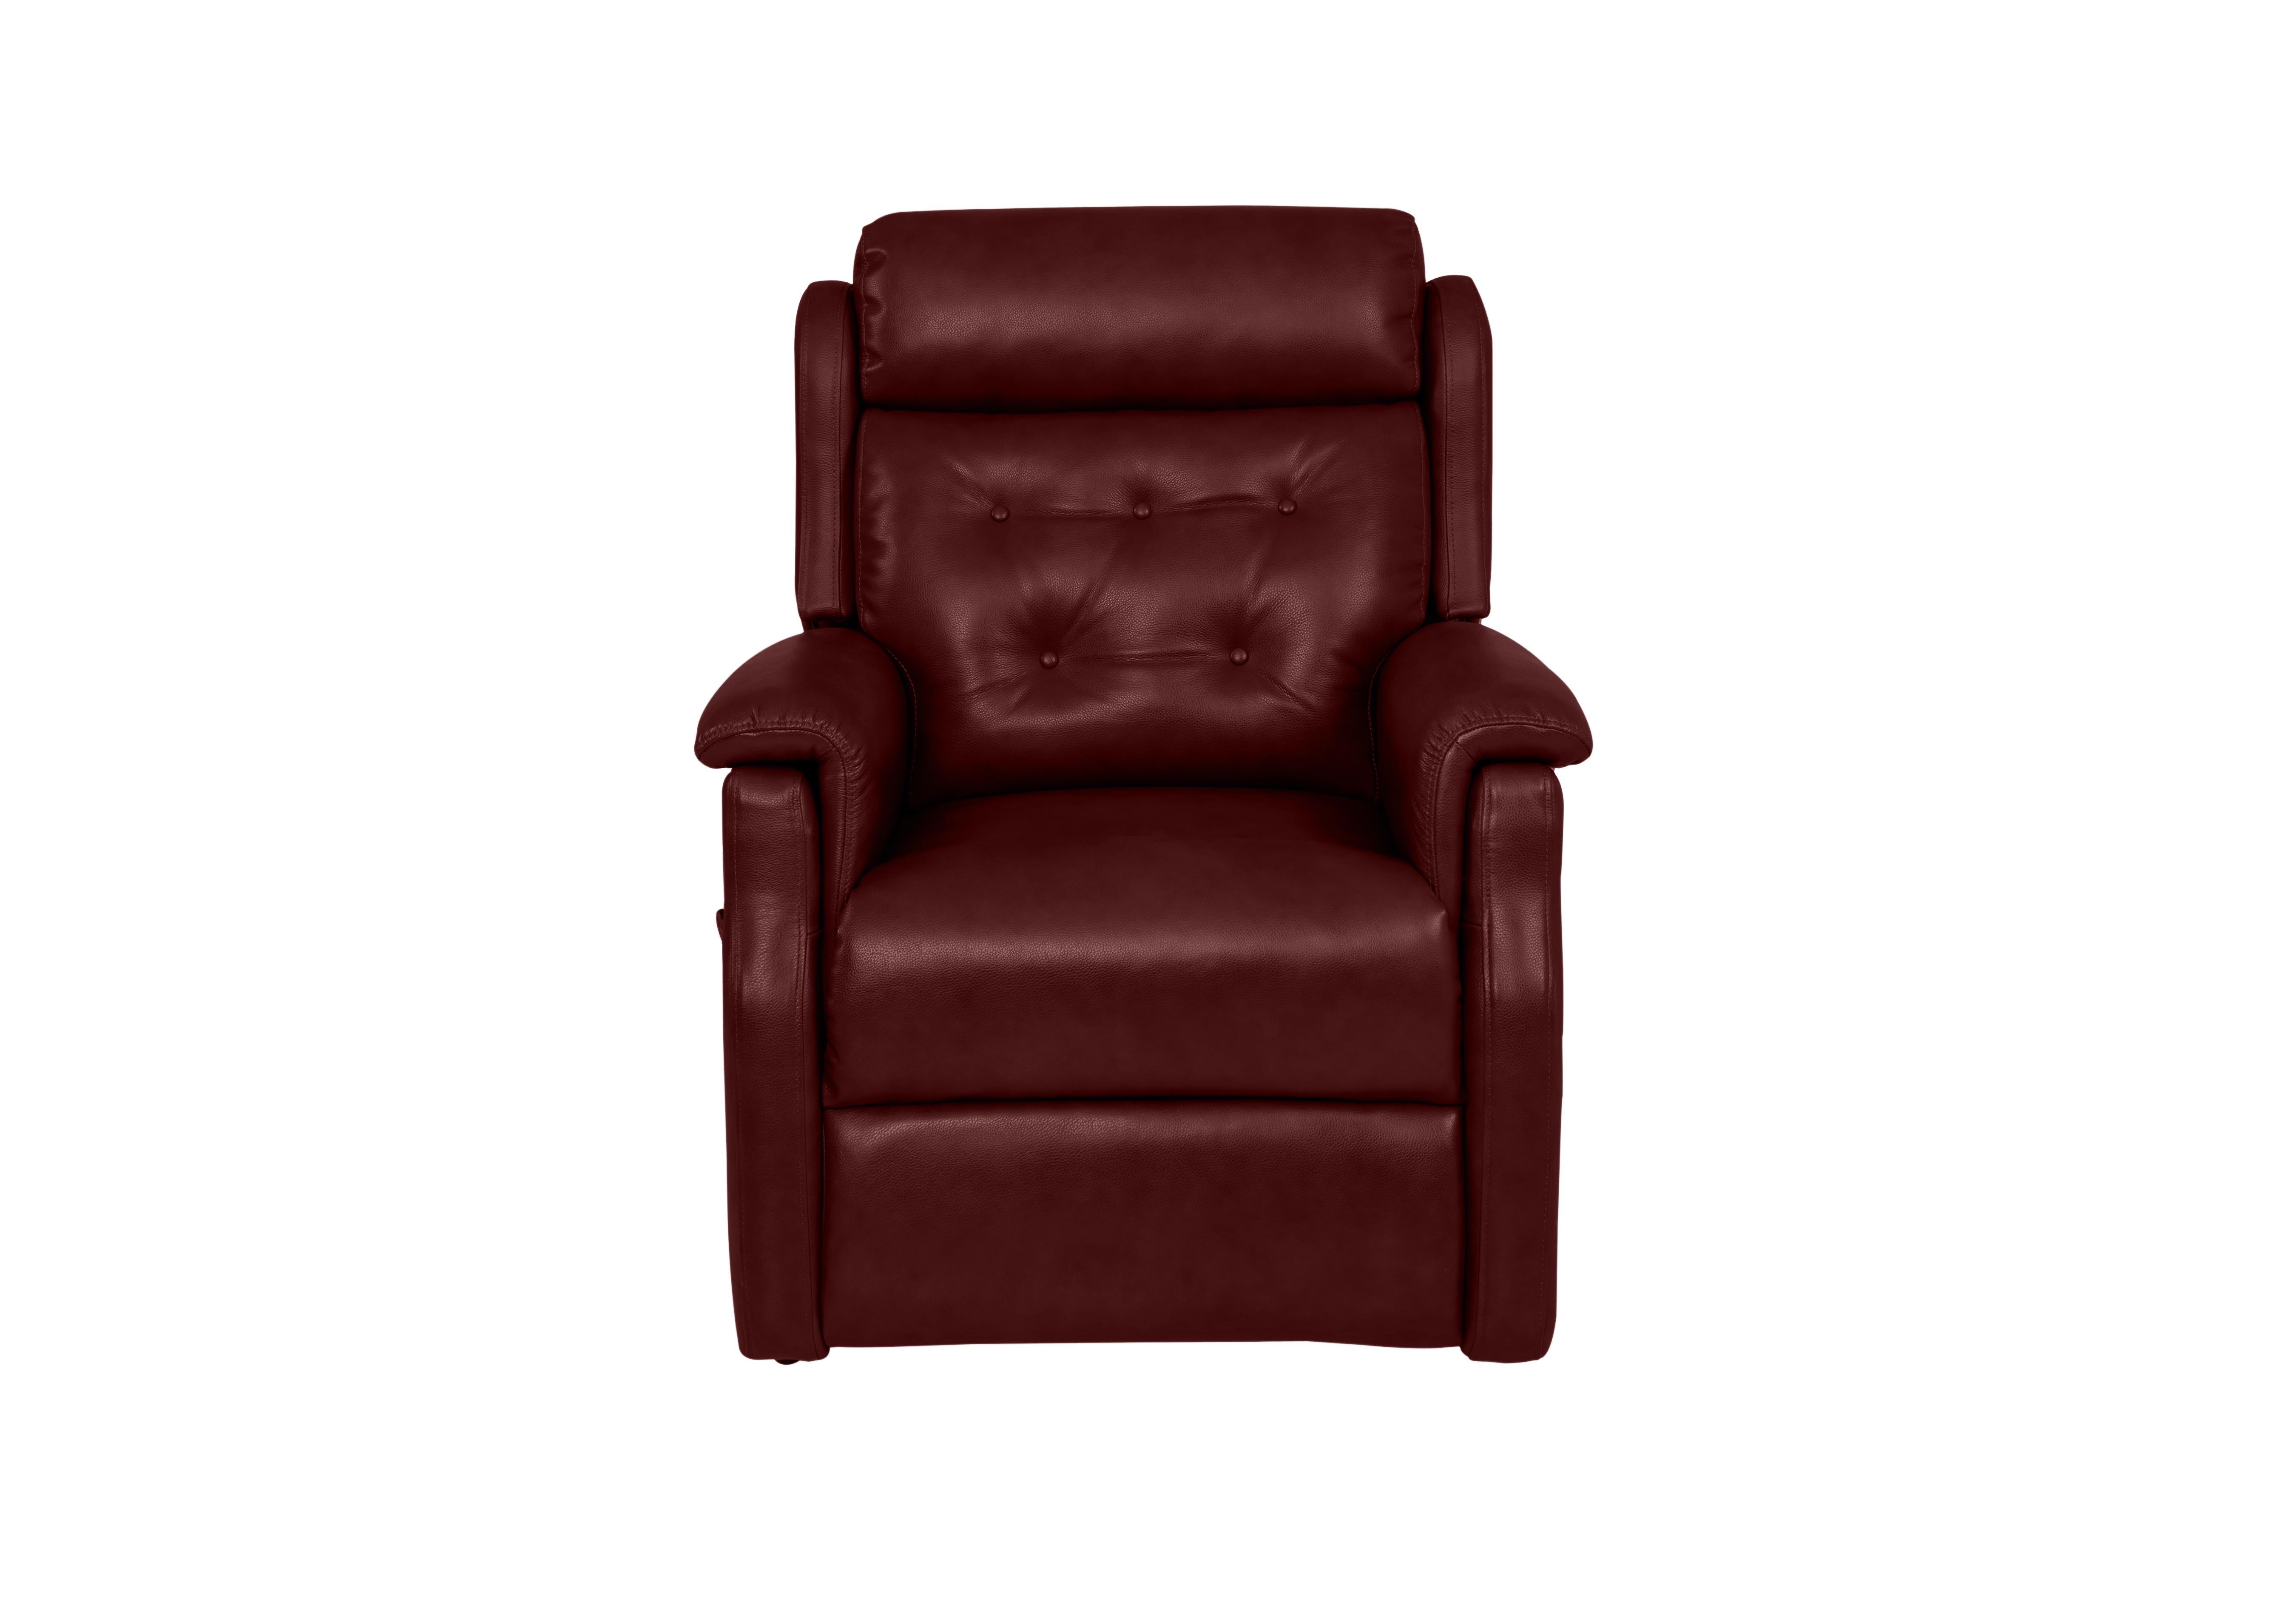 My Chair Scott Leather Lift and Rise Chair in Cat-60/15 Montana Ruby on Furniture Village